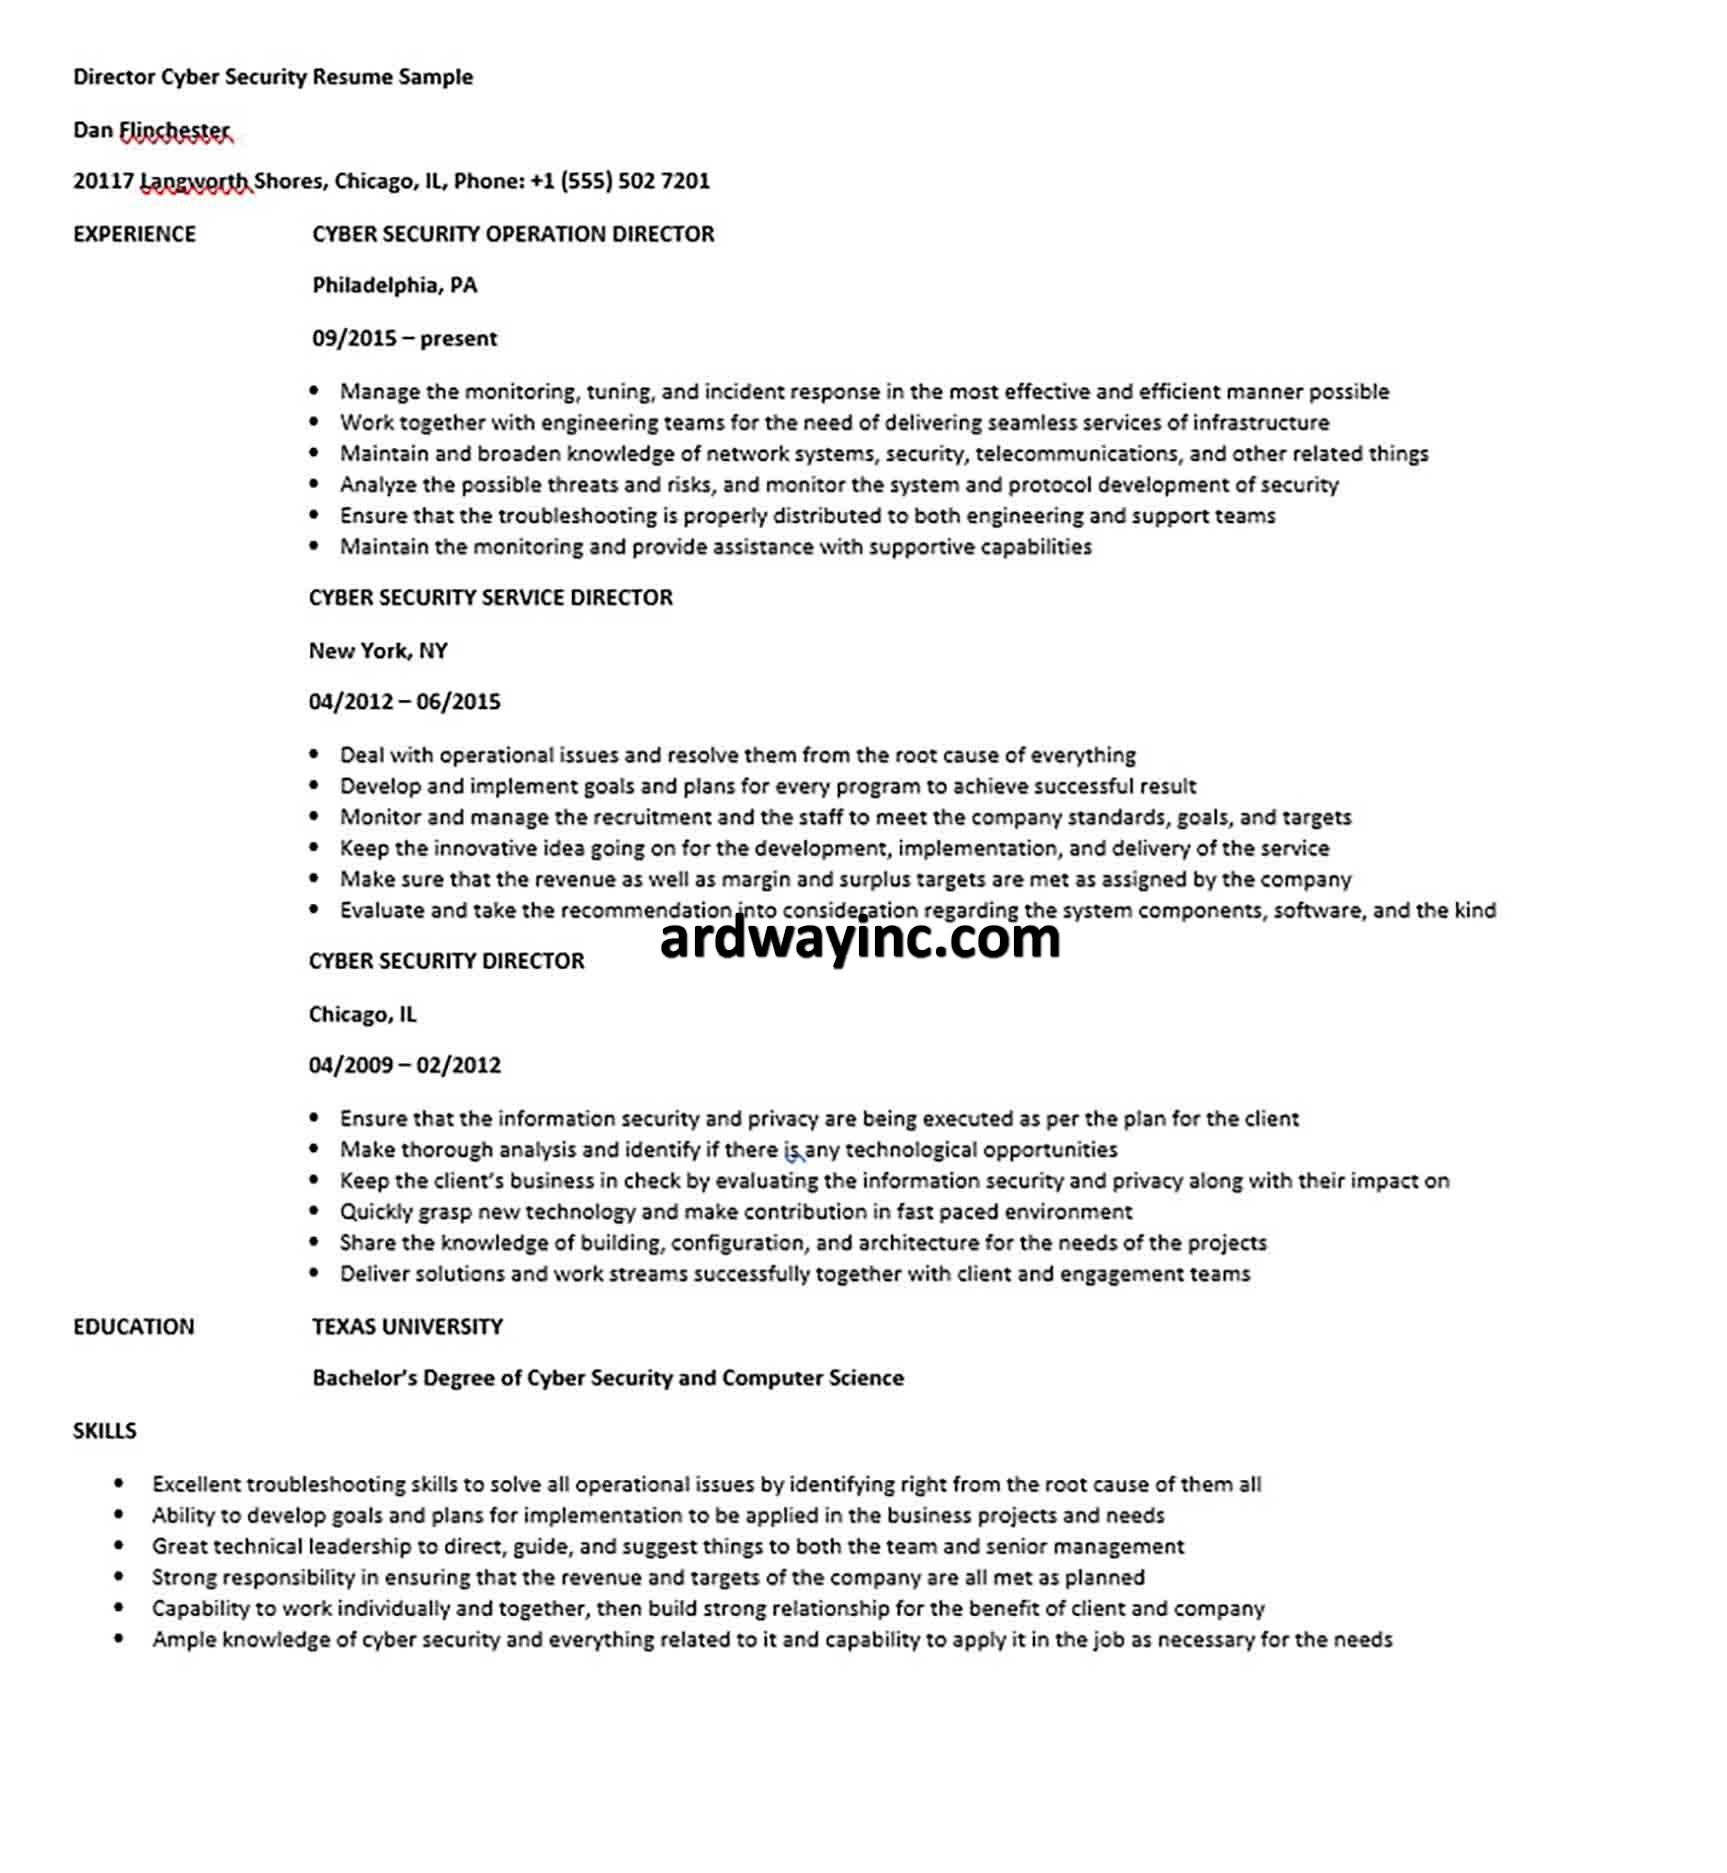 Director Cyber Security Resume Sample